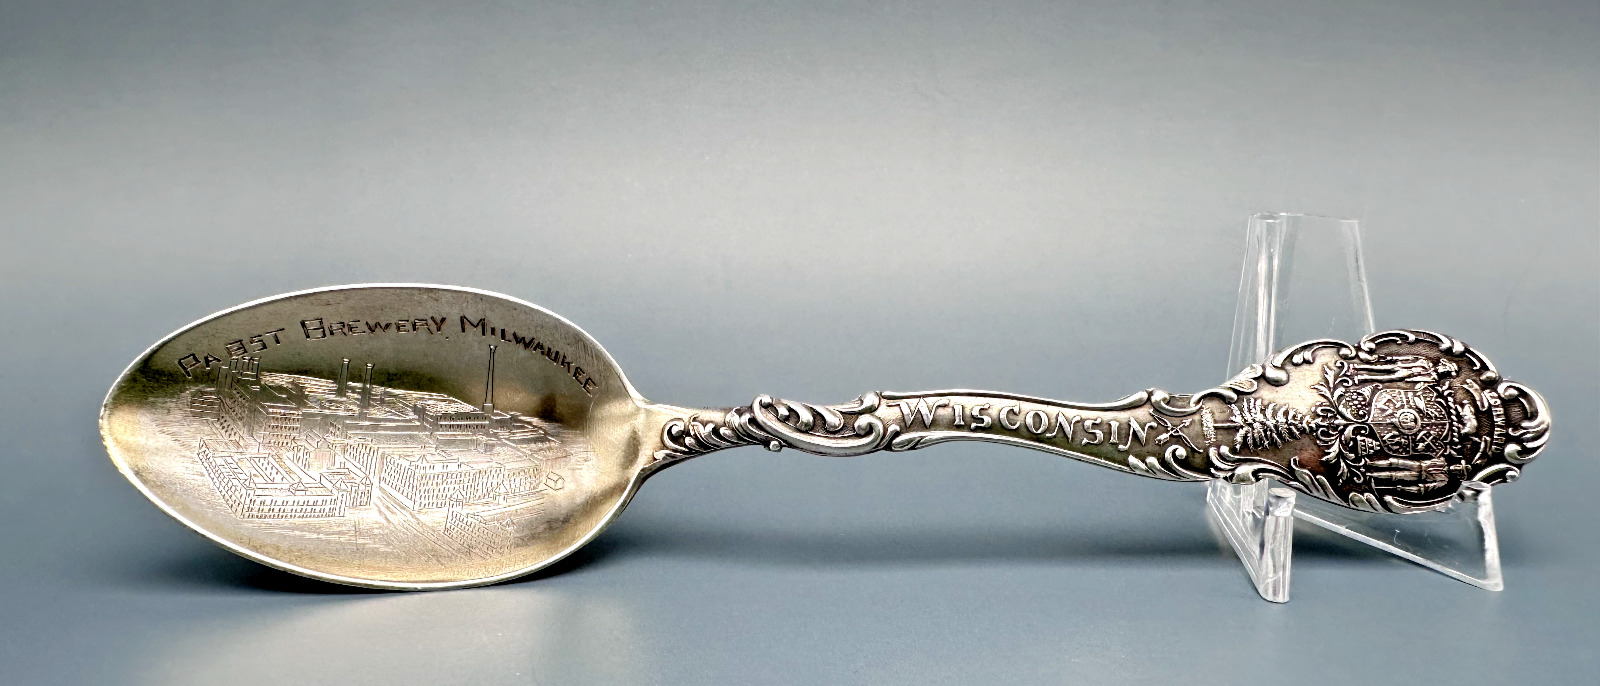 ANTIQUE(?) PABST BREWERY MILWAUKEE WI STERLING SILVER SPOON B113